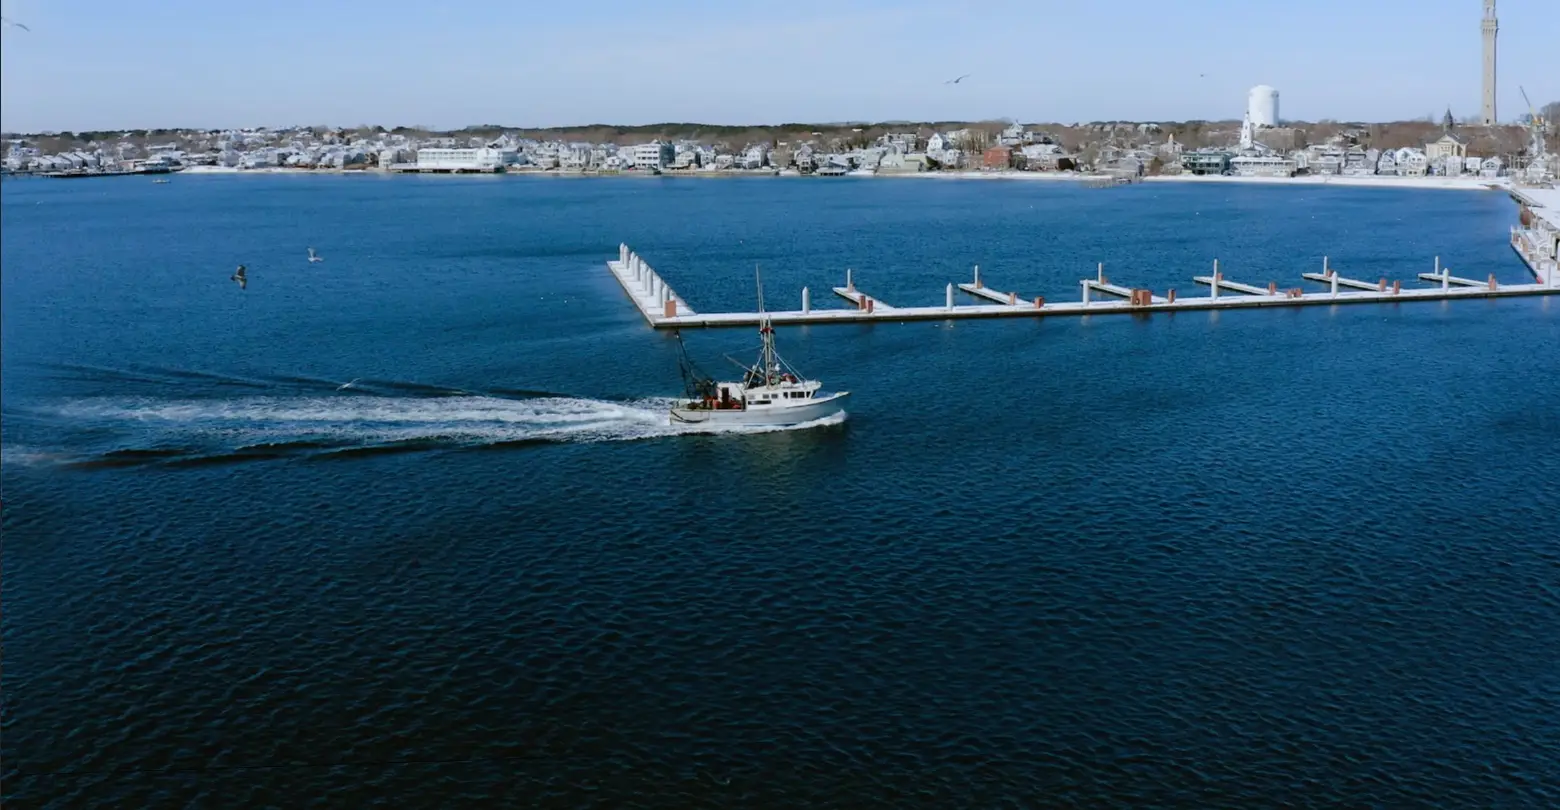 An aerial view of a branded work boat in the water near a dock.